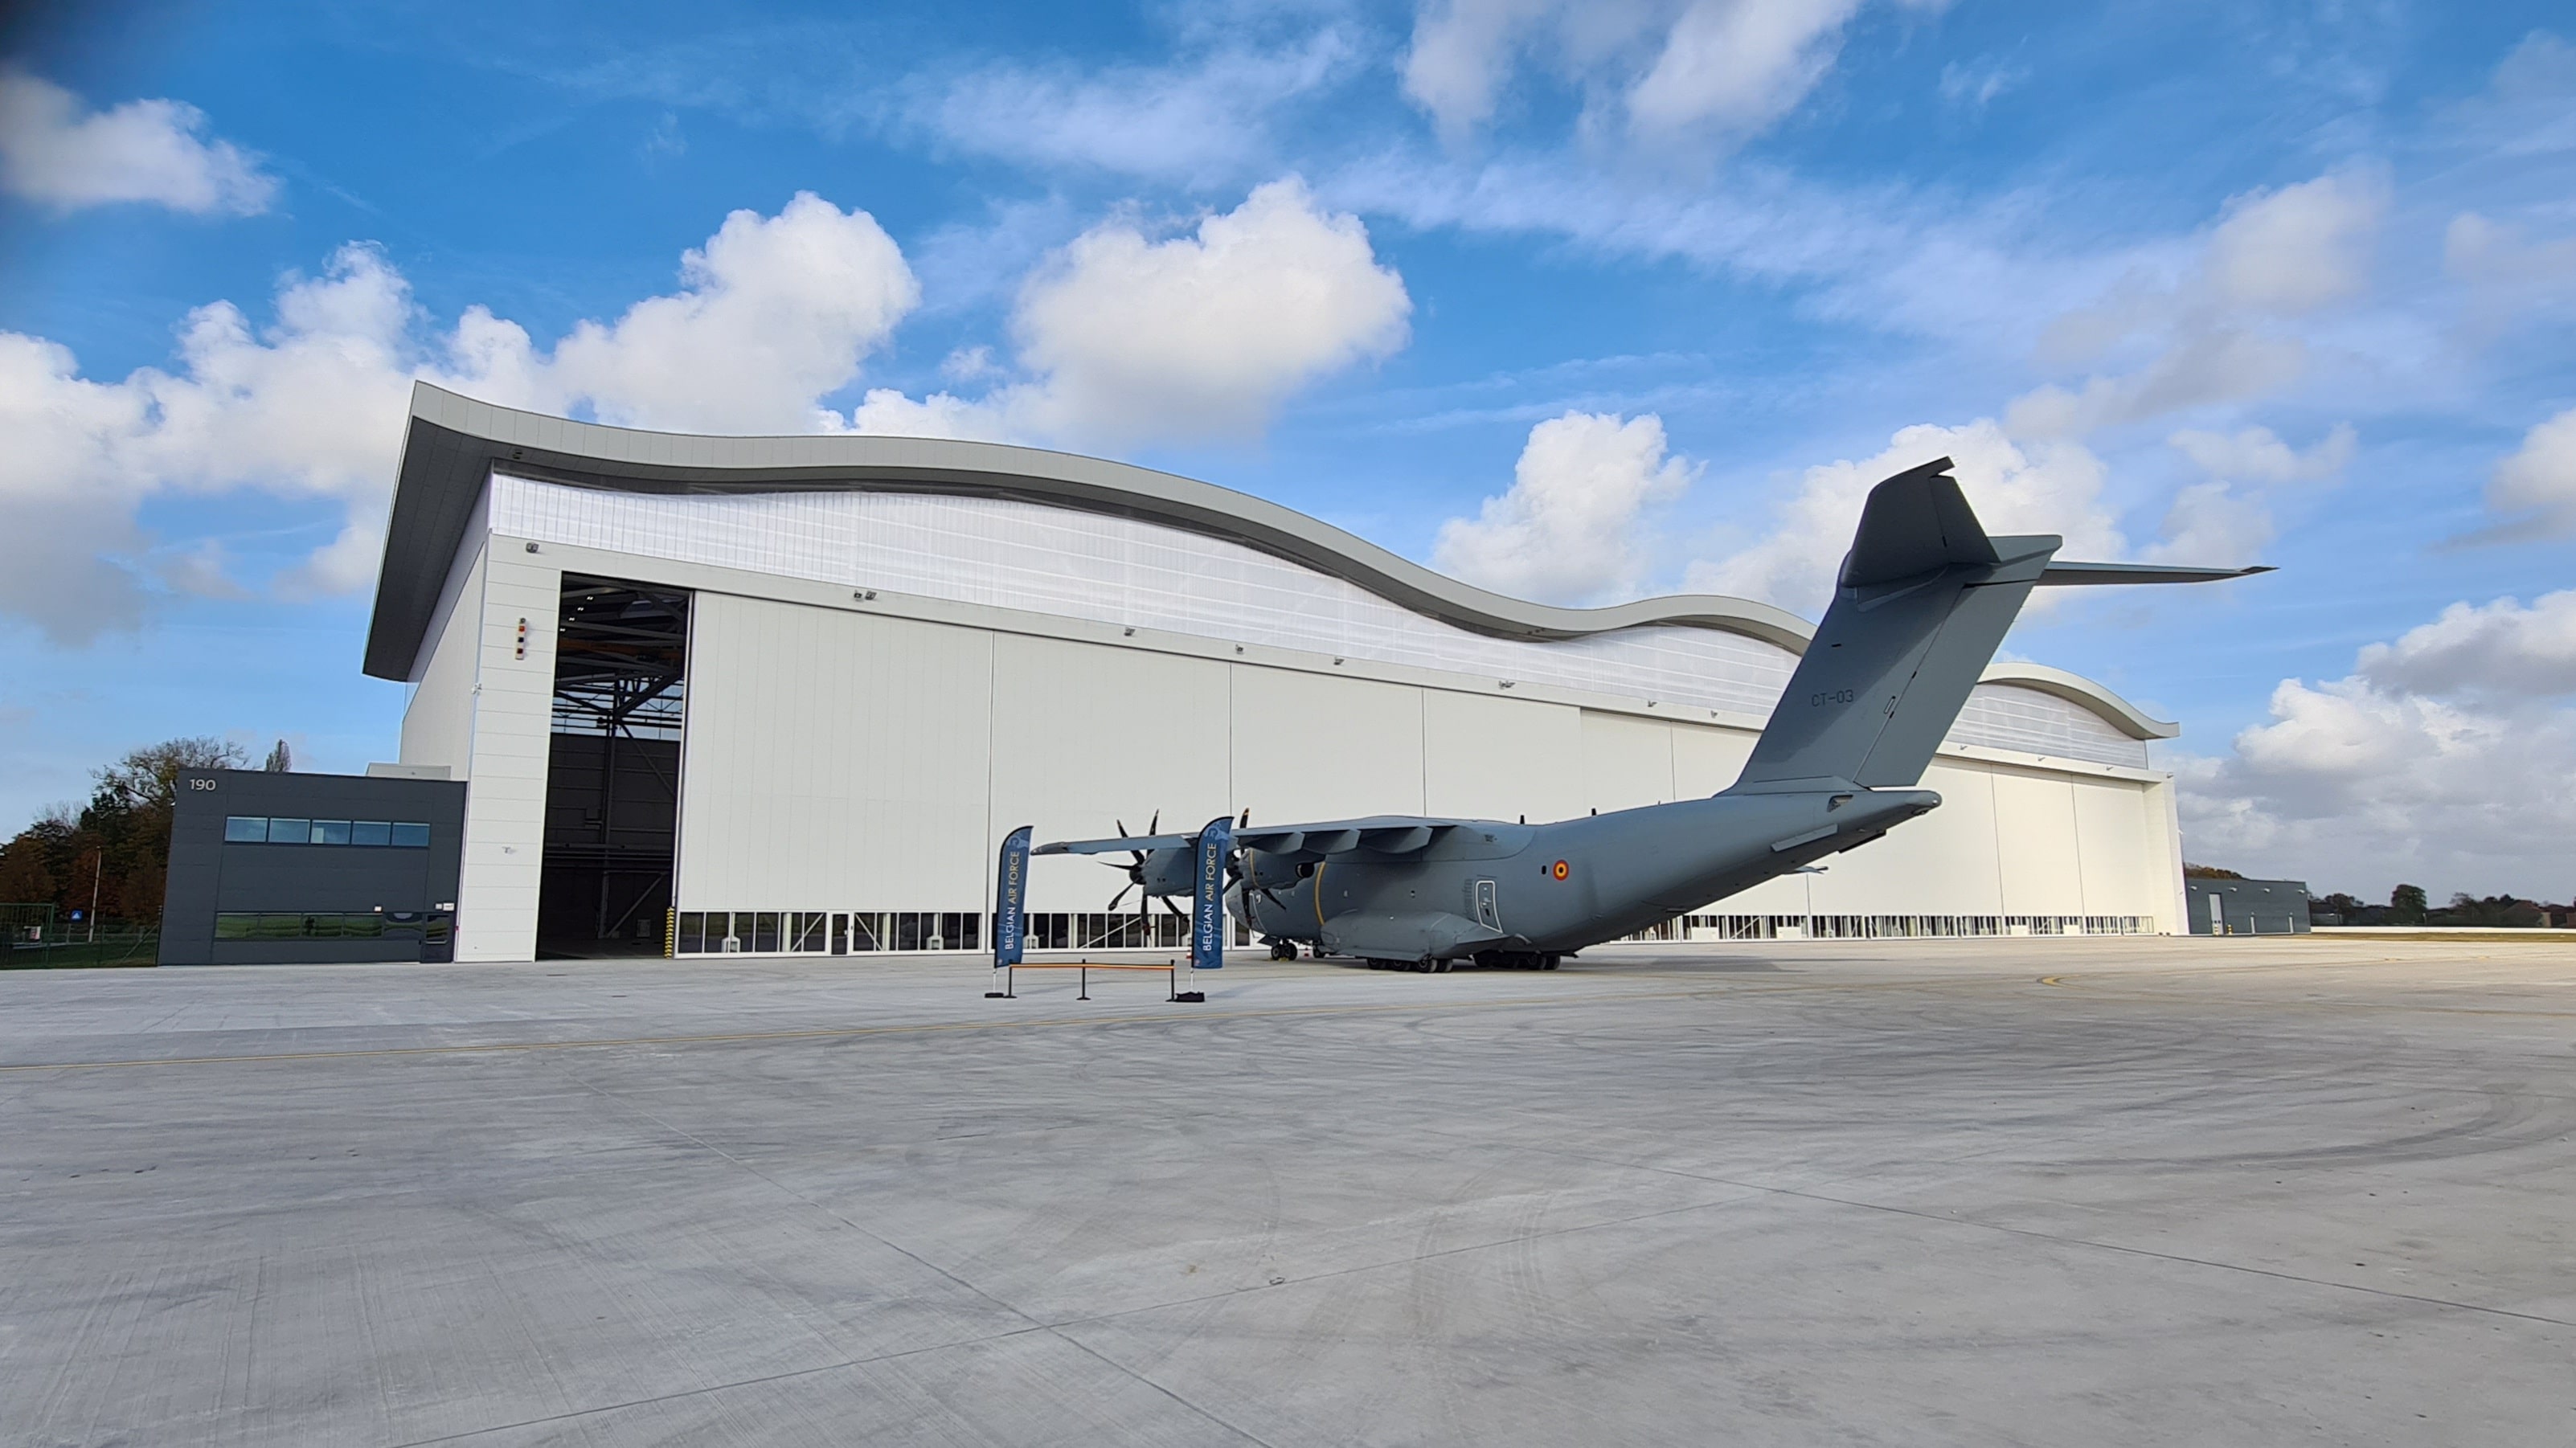 Roof of the Airbus A400M hangar in Melsbroek in Belgium waterproofed with the Elevate UltraPly TPO membrane